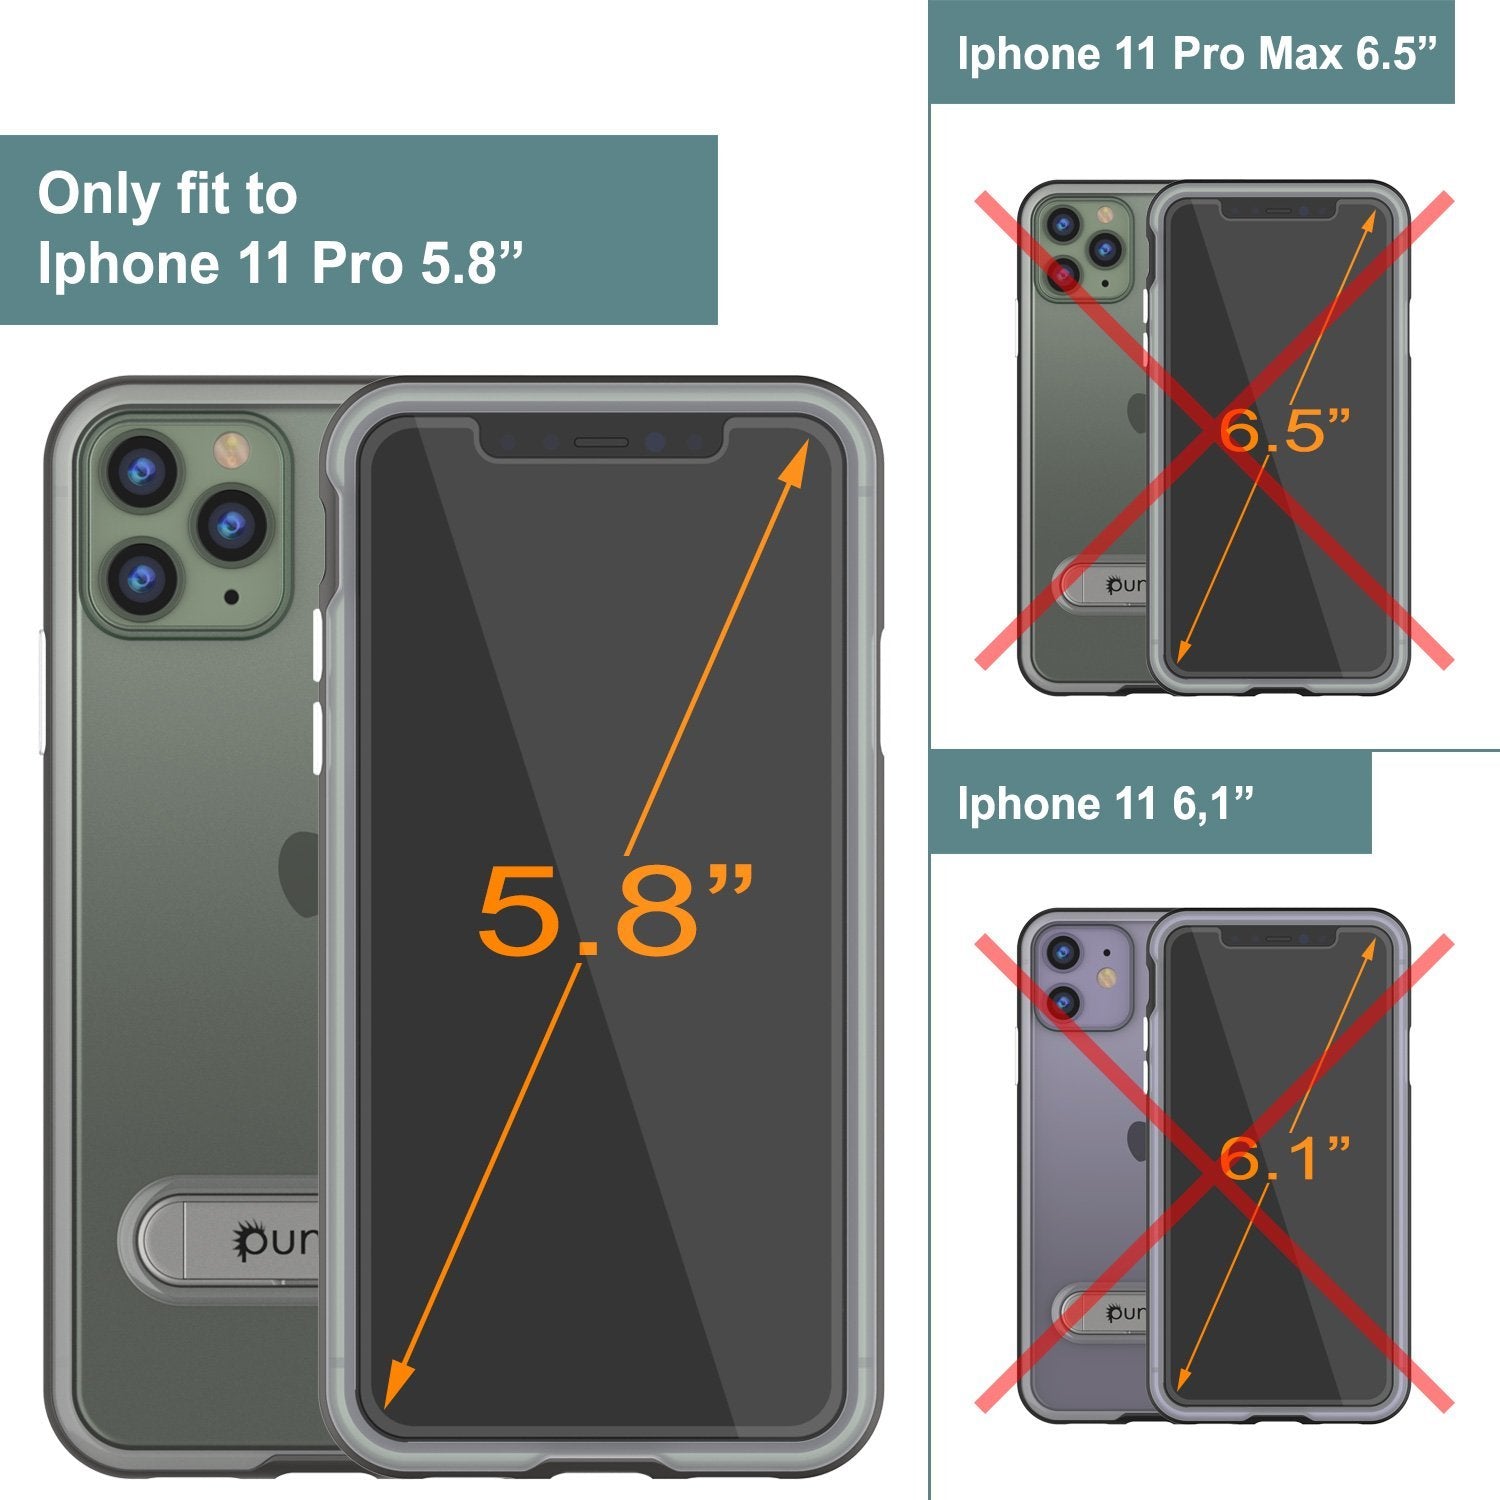 iPhone 12 Pro Case, PUNKcase [LUCID 3.0 Series] [Slim Fit] Protective Cover w/ Integrated Screen Protector [Grey]